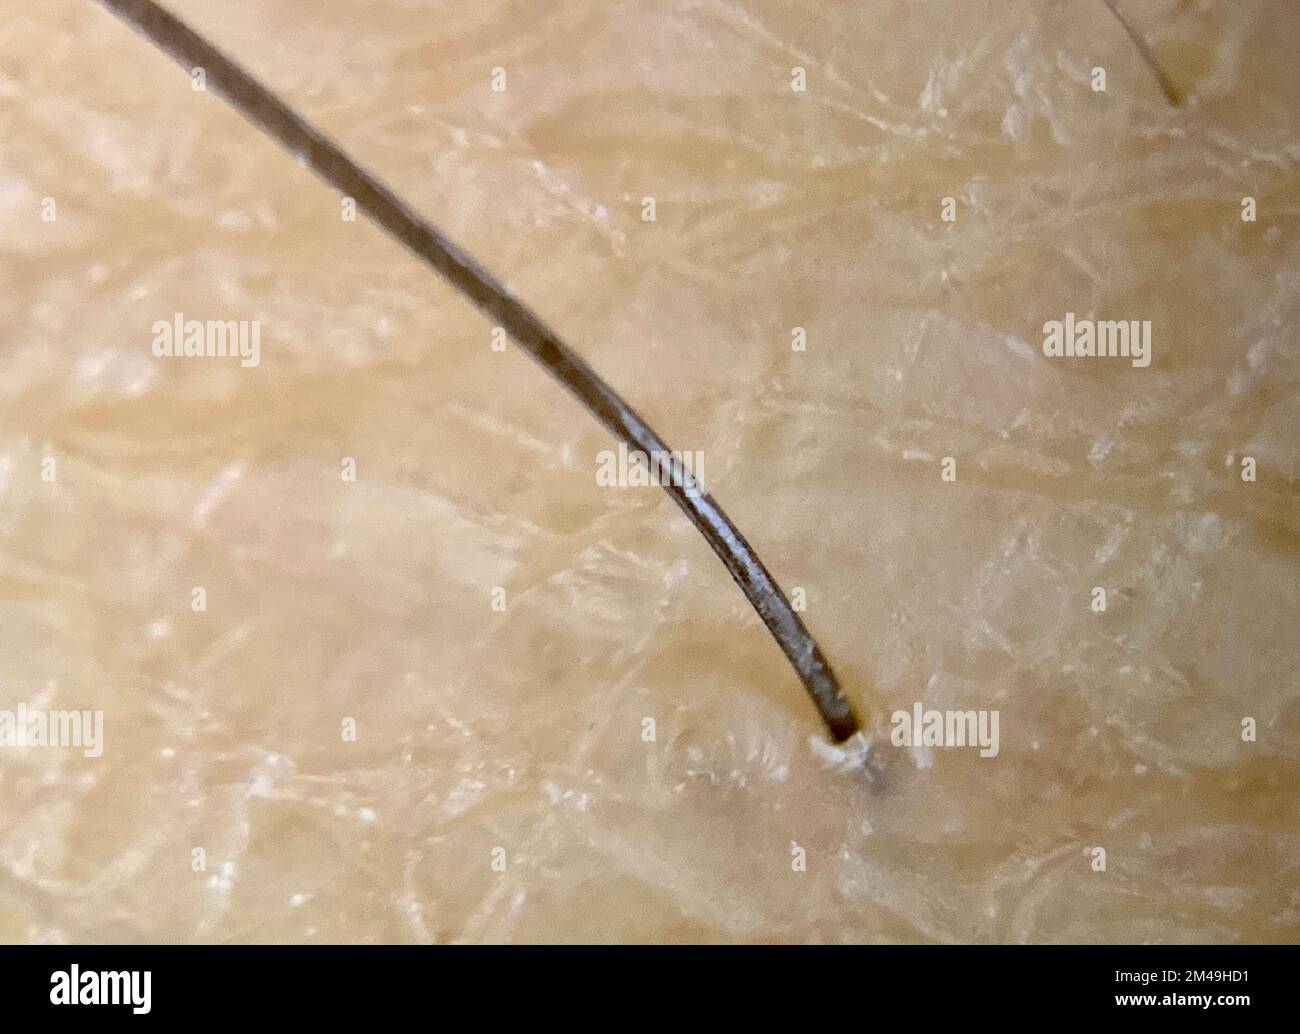 Concept of hereditary baldness androgenetic alopecia and 5-alpha reductase: Close up detail of a human hair coming out of the epidermis. transplanted Stock Photo